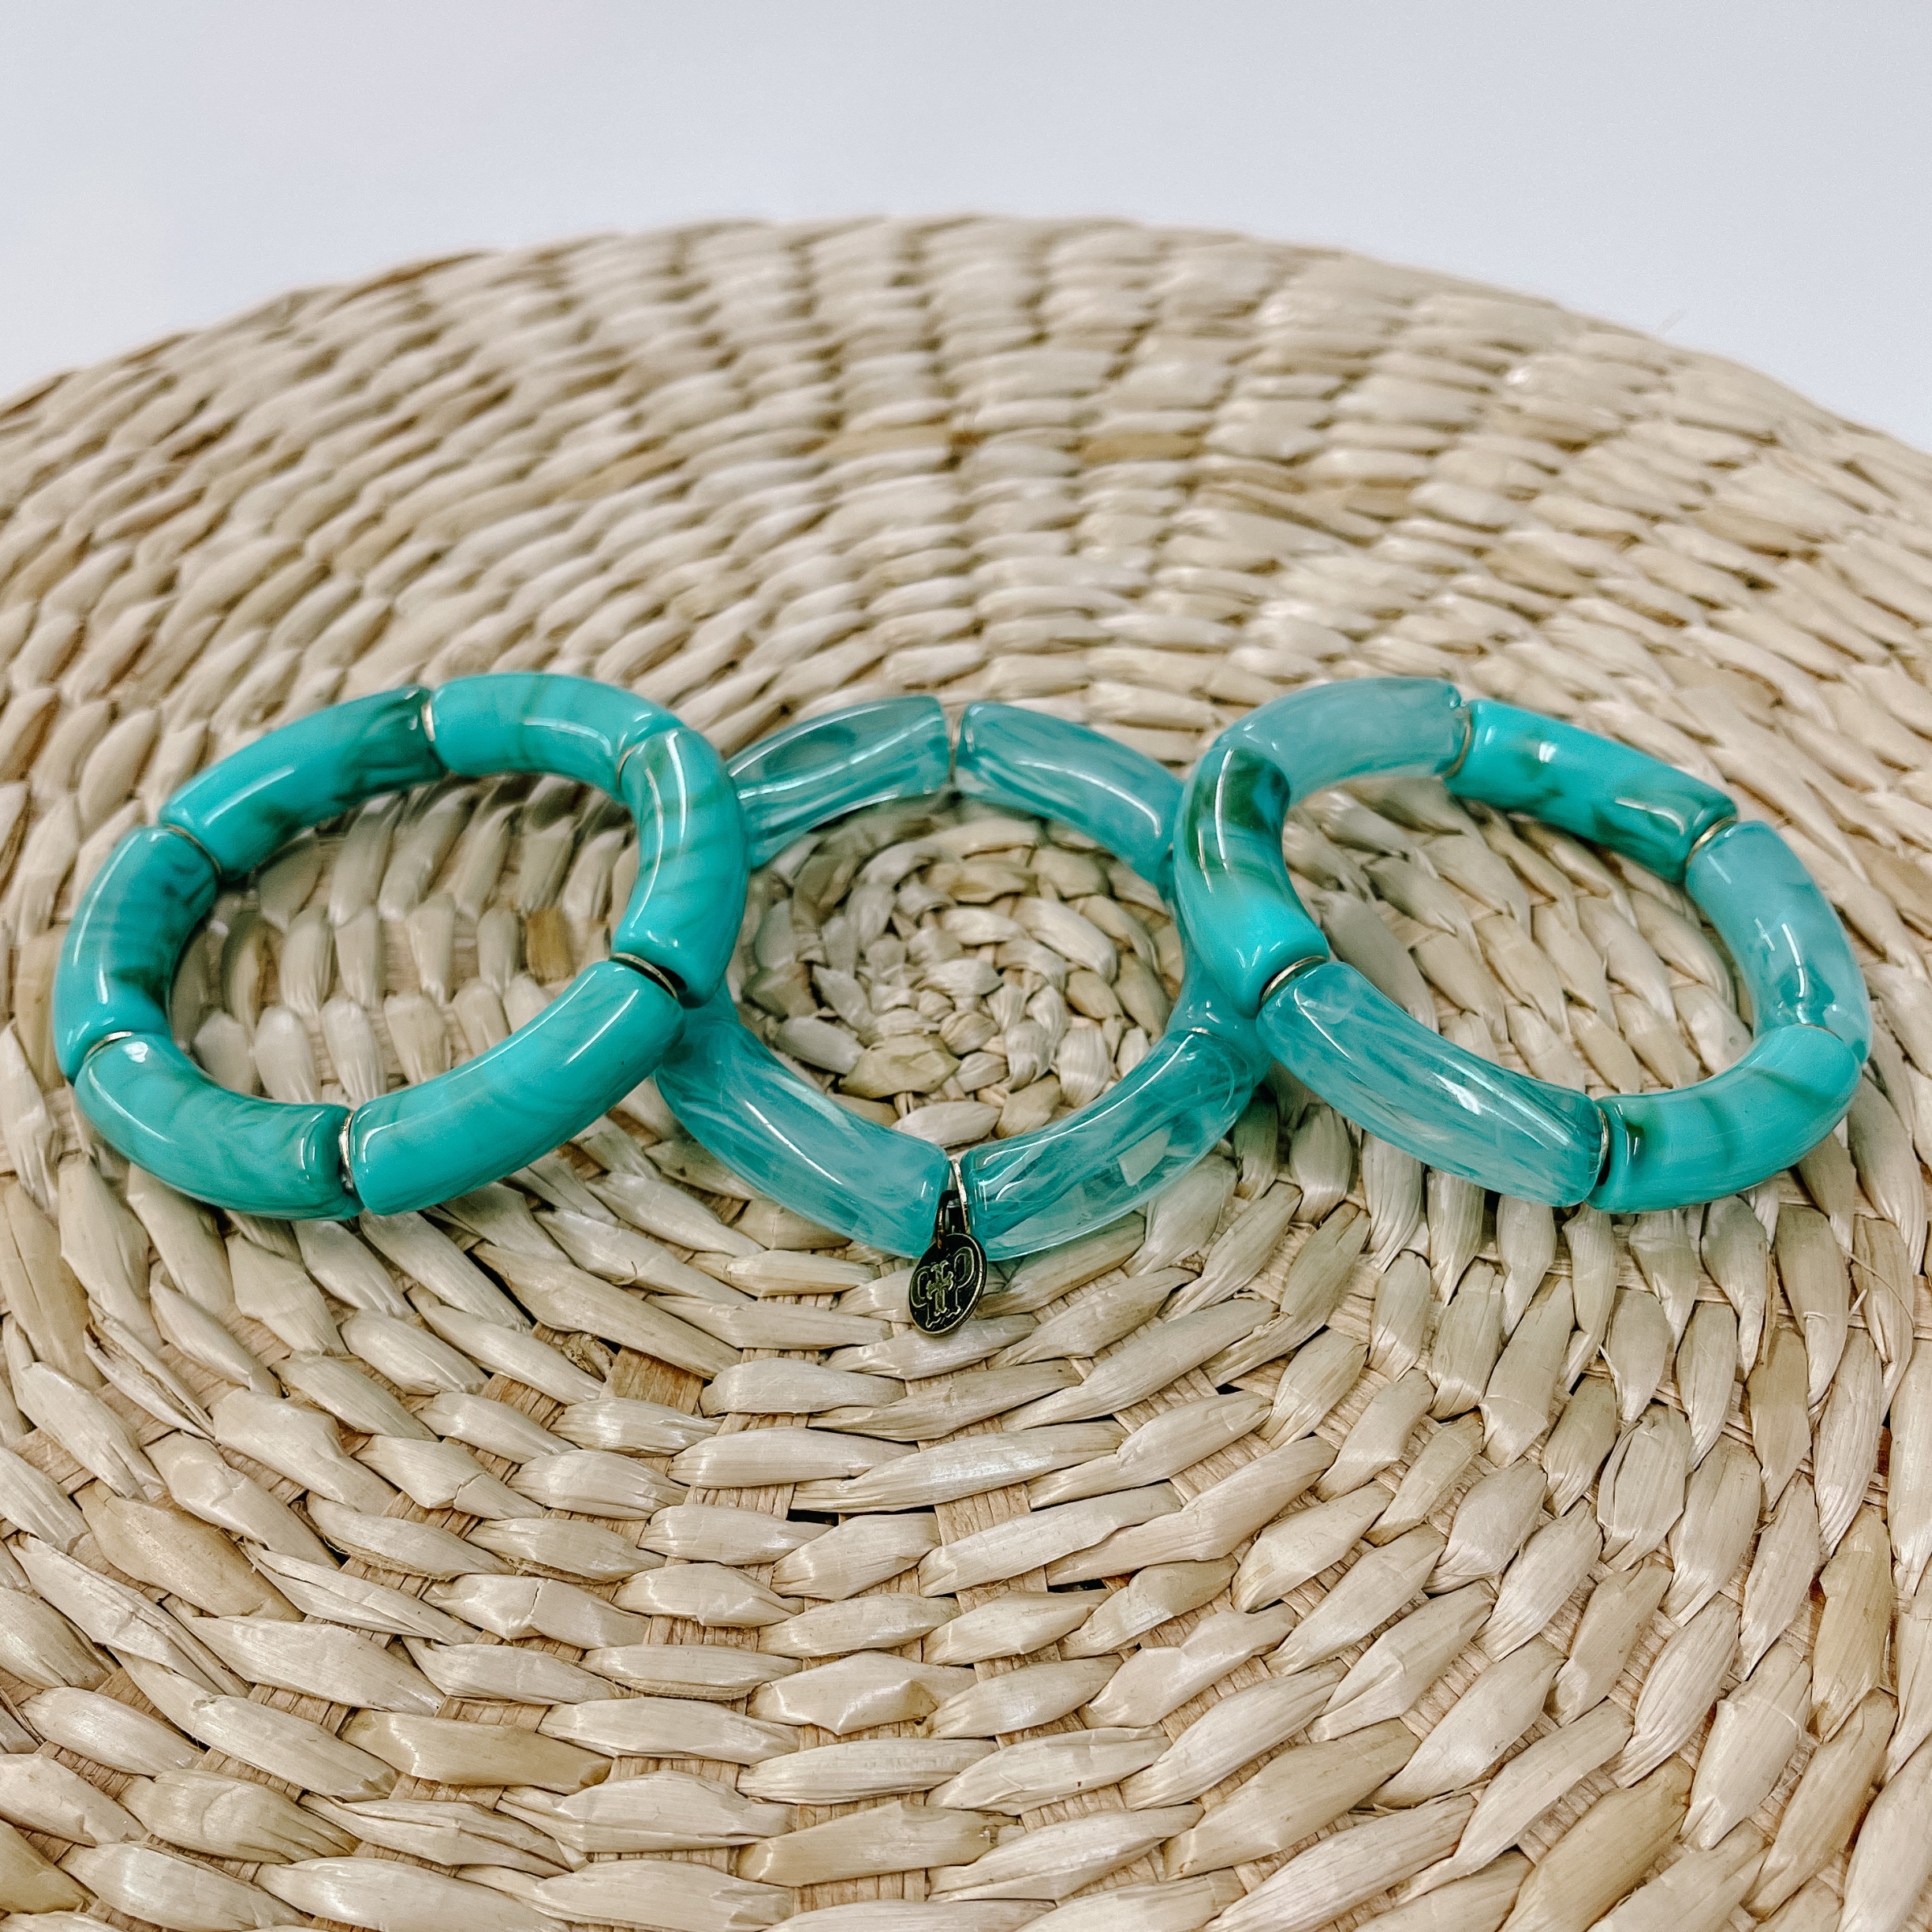 These are three acrylic tube bracelets in teal  with different acrylic patterns and gold spacers. The bracelet in the  left is a mix of solid teal and green marble. The middle one is clear teal marble tubes.  The right one is a mix of clear teal marble tubes and solid teal and green marble tubes. Taken on top of a bamboo stool and white background.